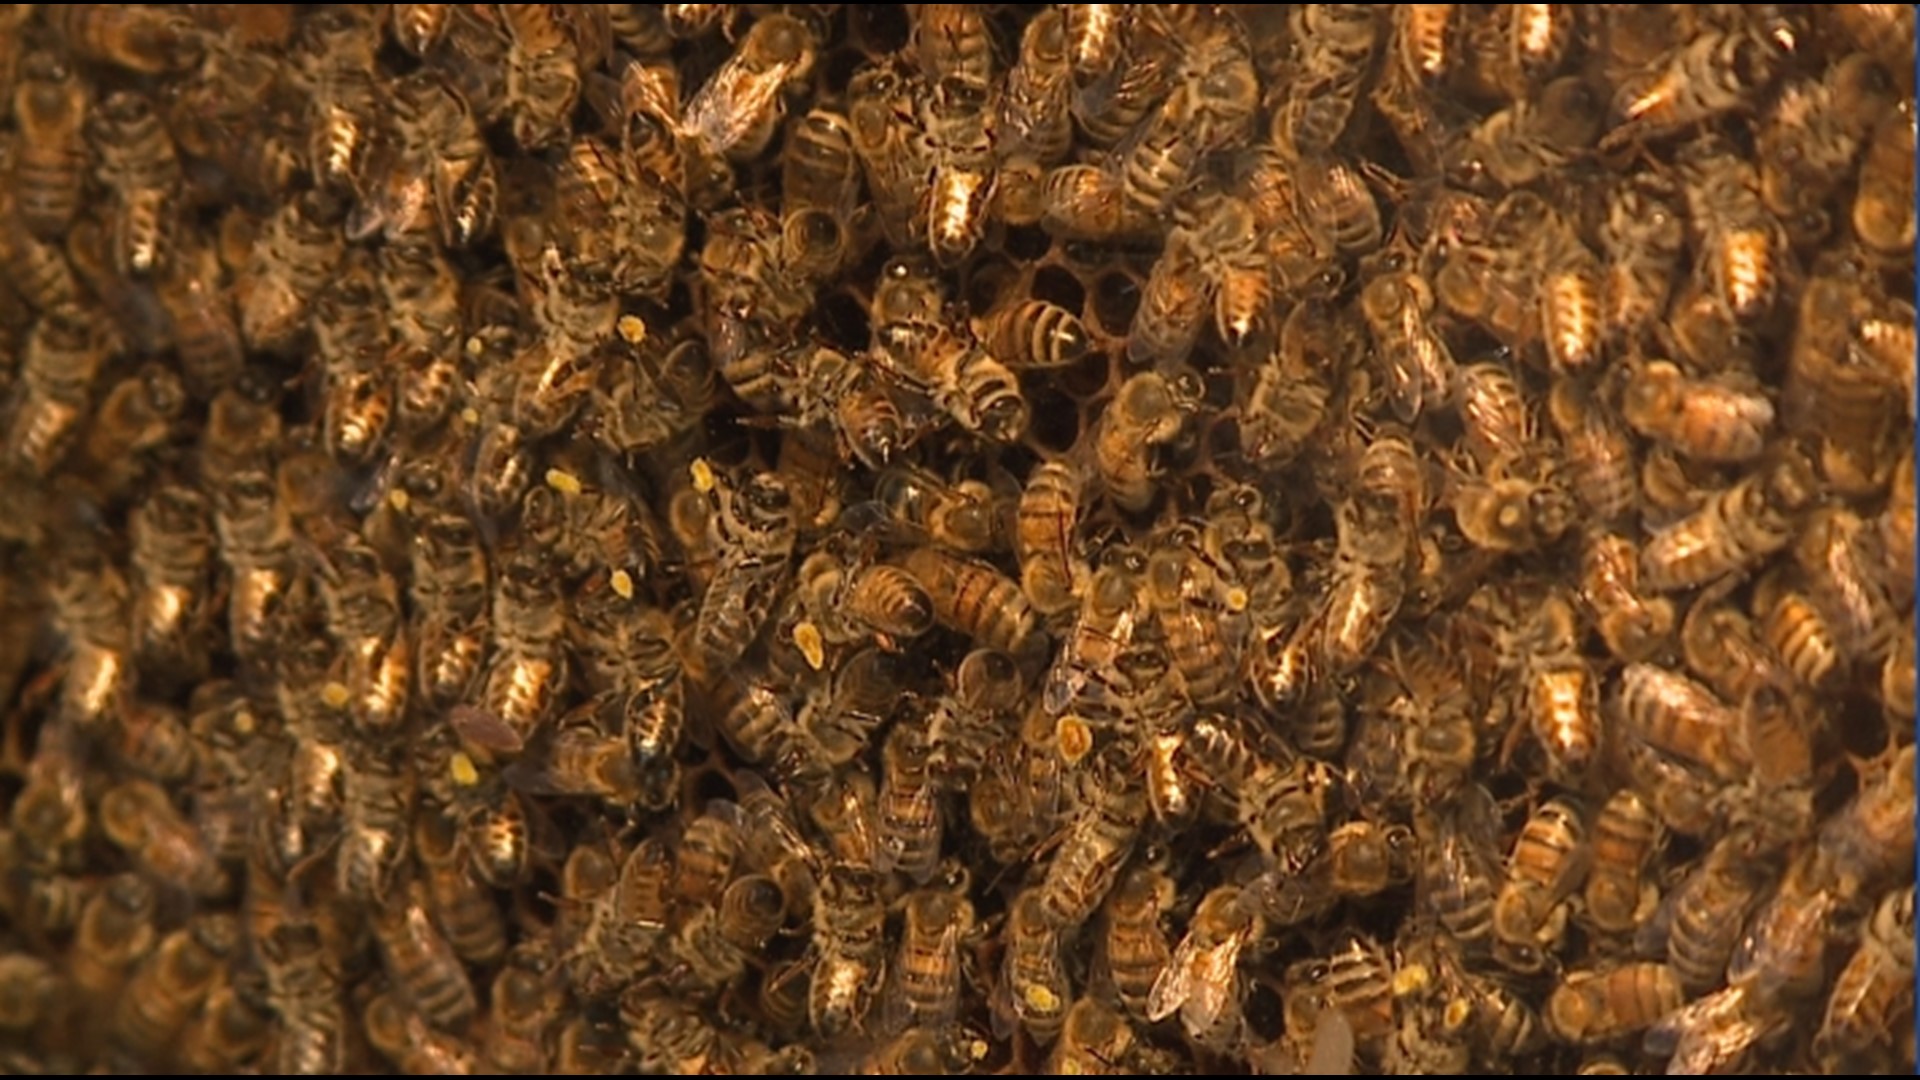 The Pennsylvania State Beekeepers Association says it's hopeful about the development, but that there's still a lot to learn about the vaccine.